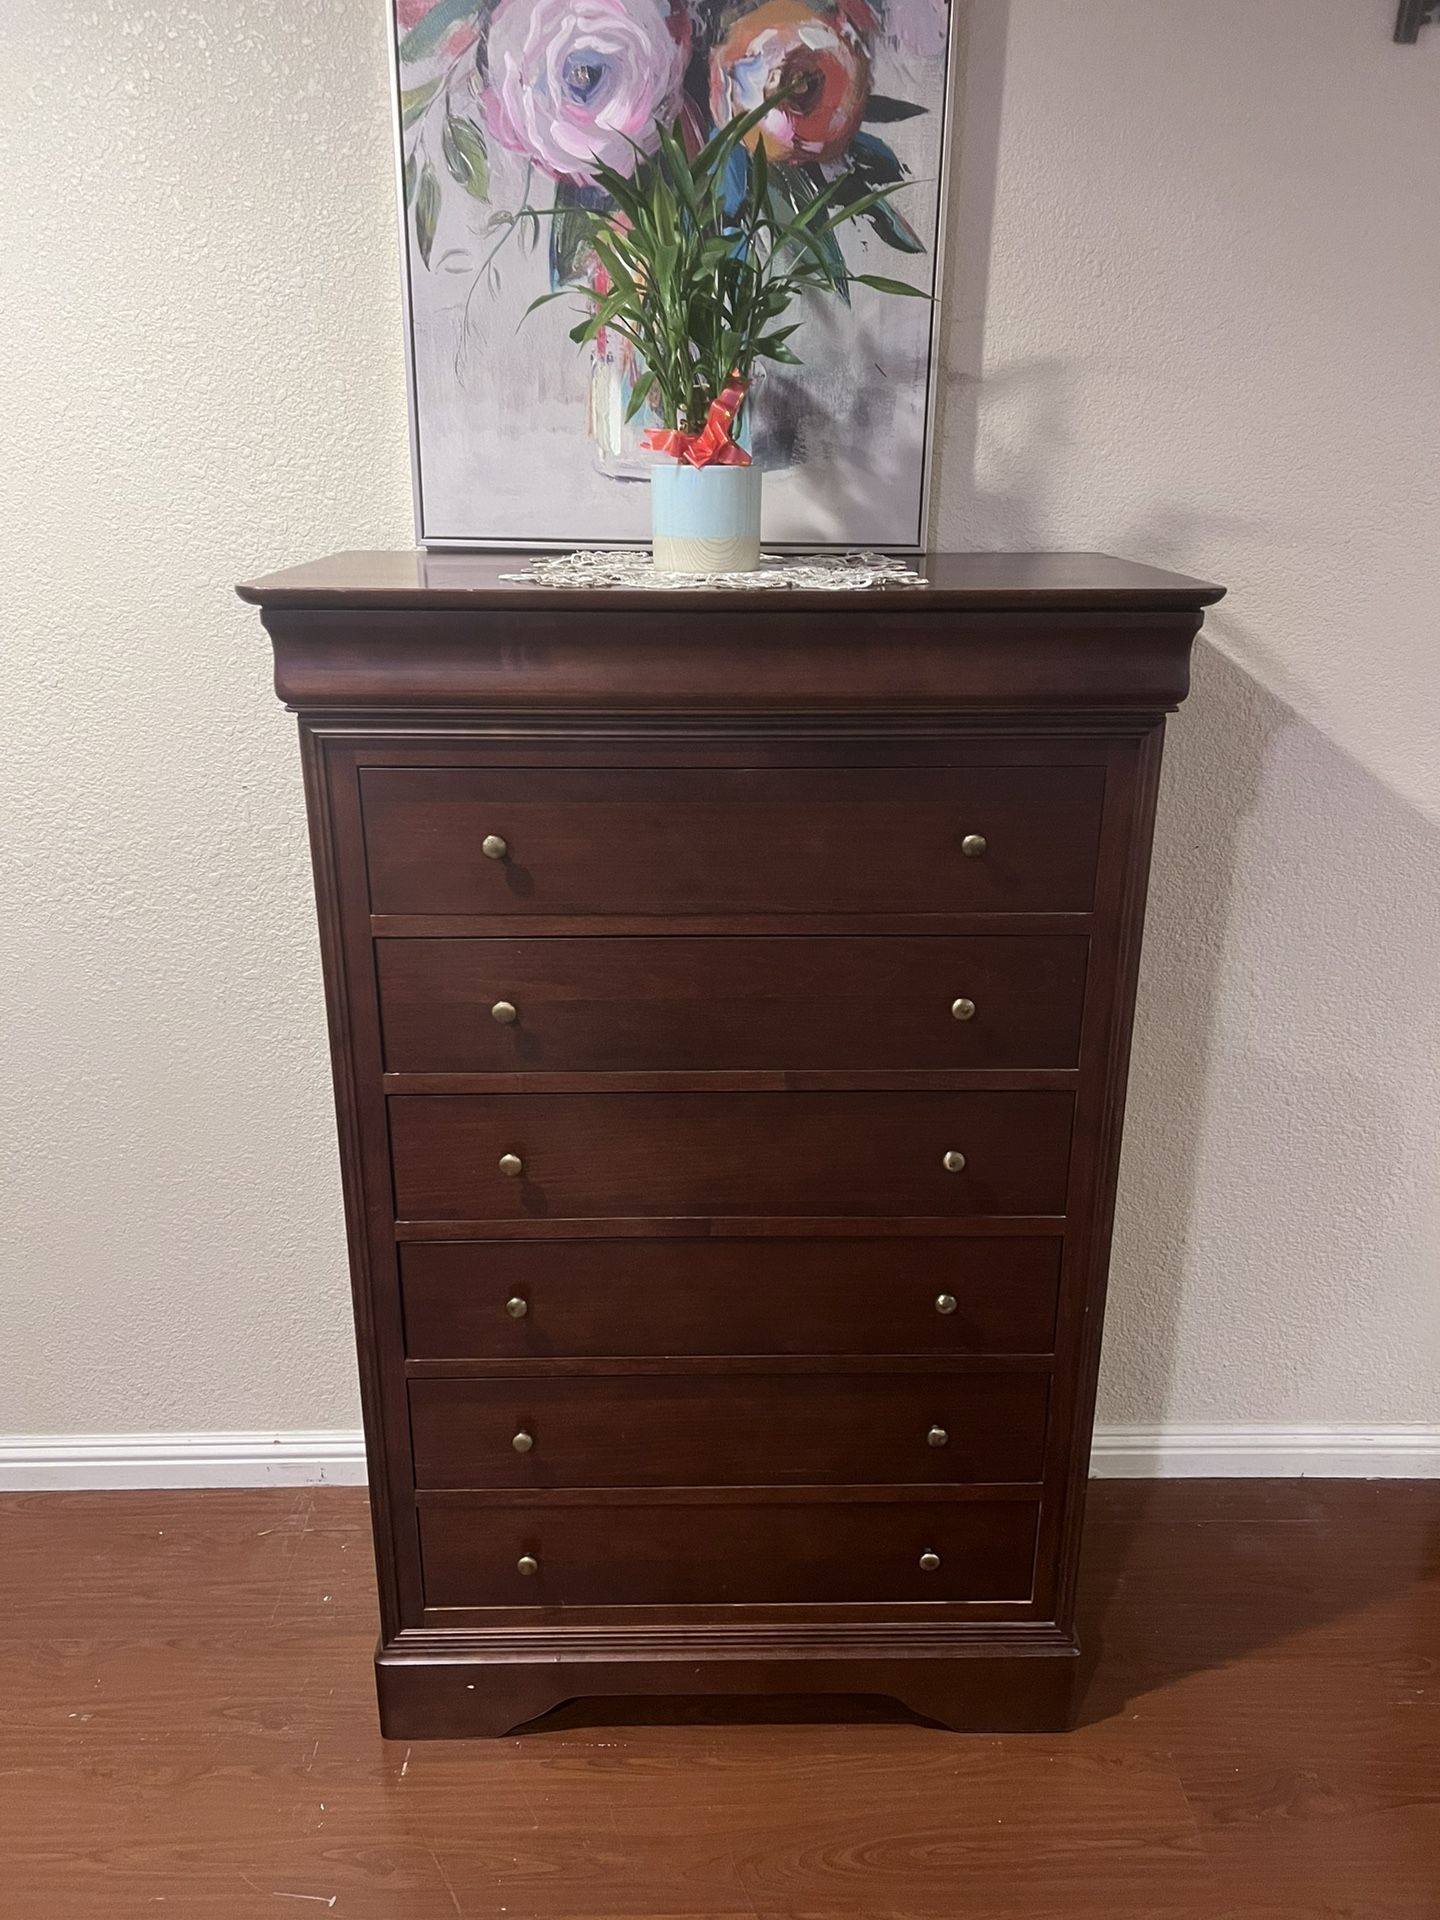 Tall dresser, with 7 drawers